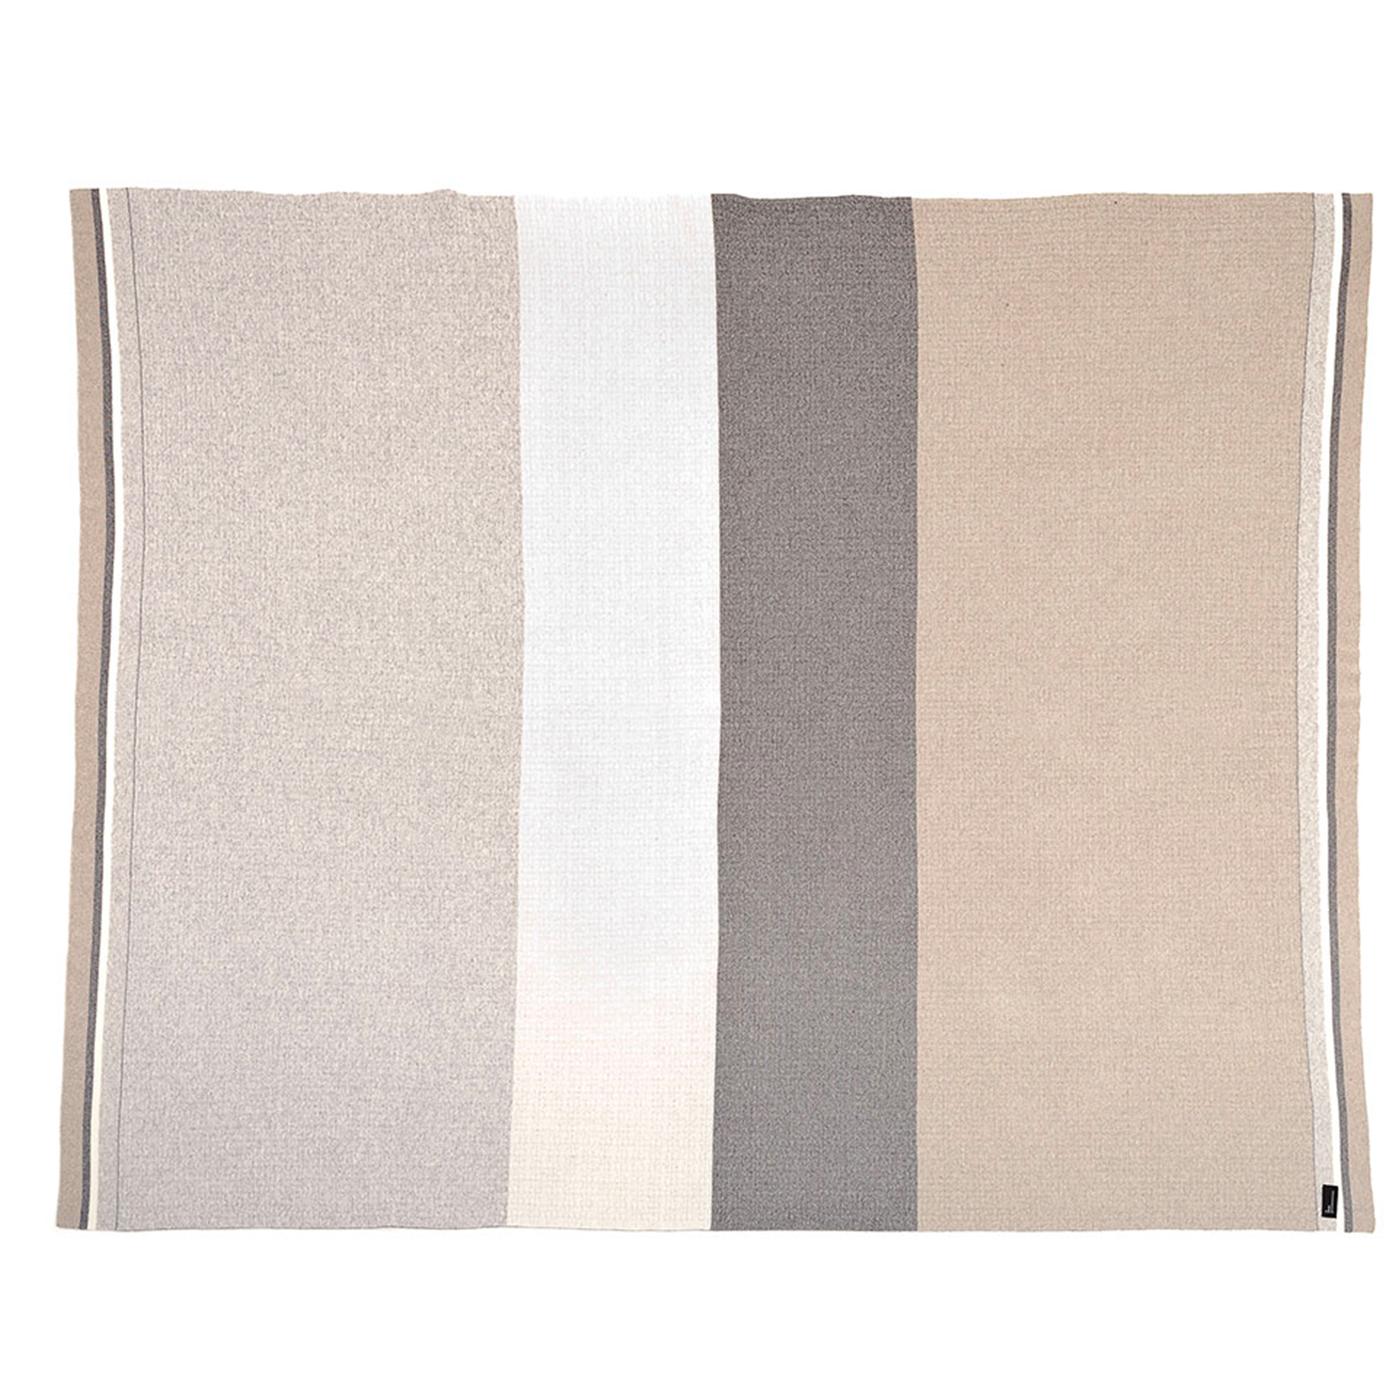 This elegant blanket will be a versatile and precious addition to a modern home, where it can be used in any room in the house. Its simple design was knitted using 40% wool, 30% viscose, 20% polyamide, and 10% cashmere for a total weight of 1.1 kg.